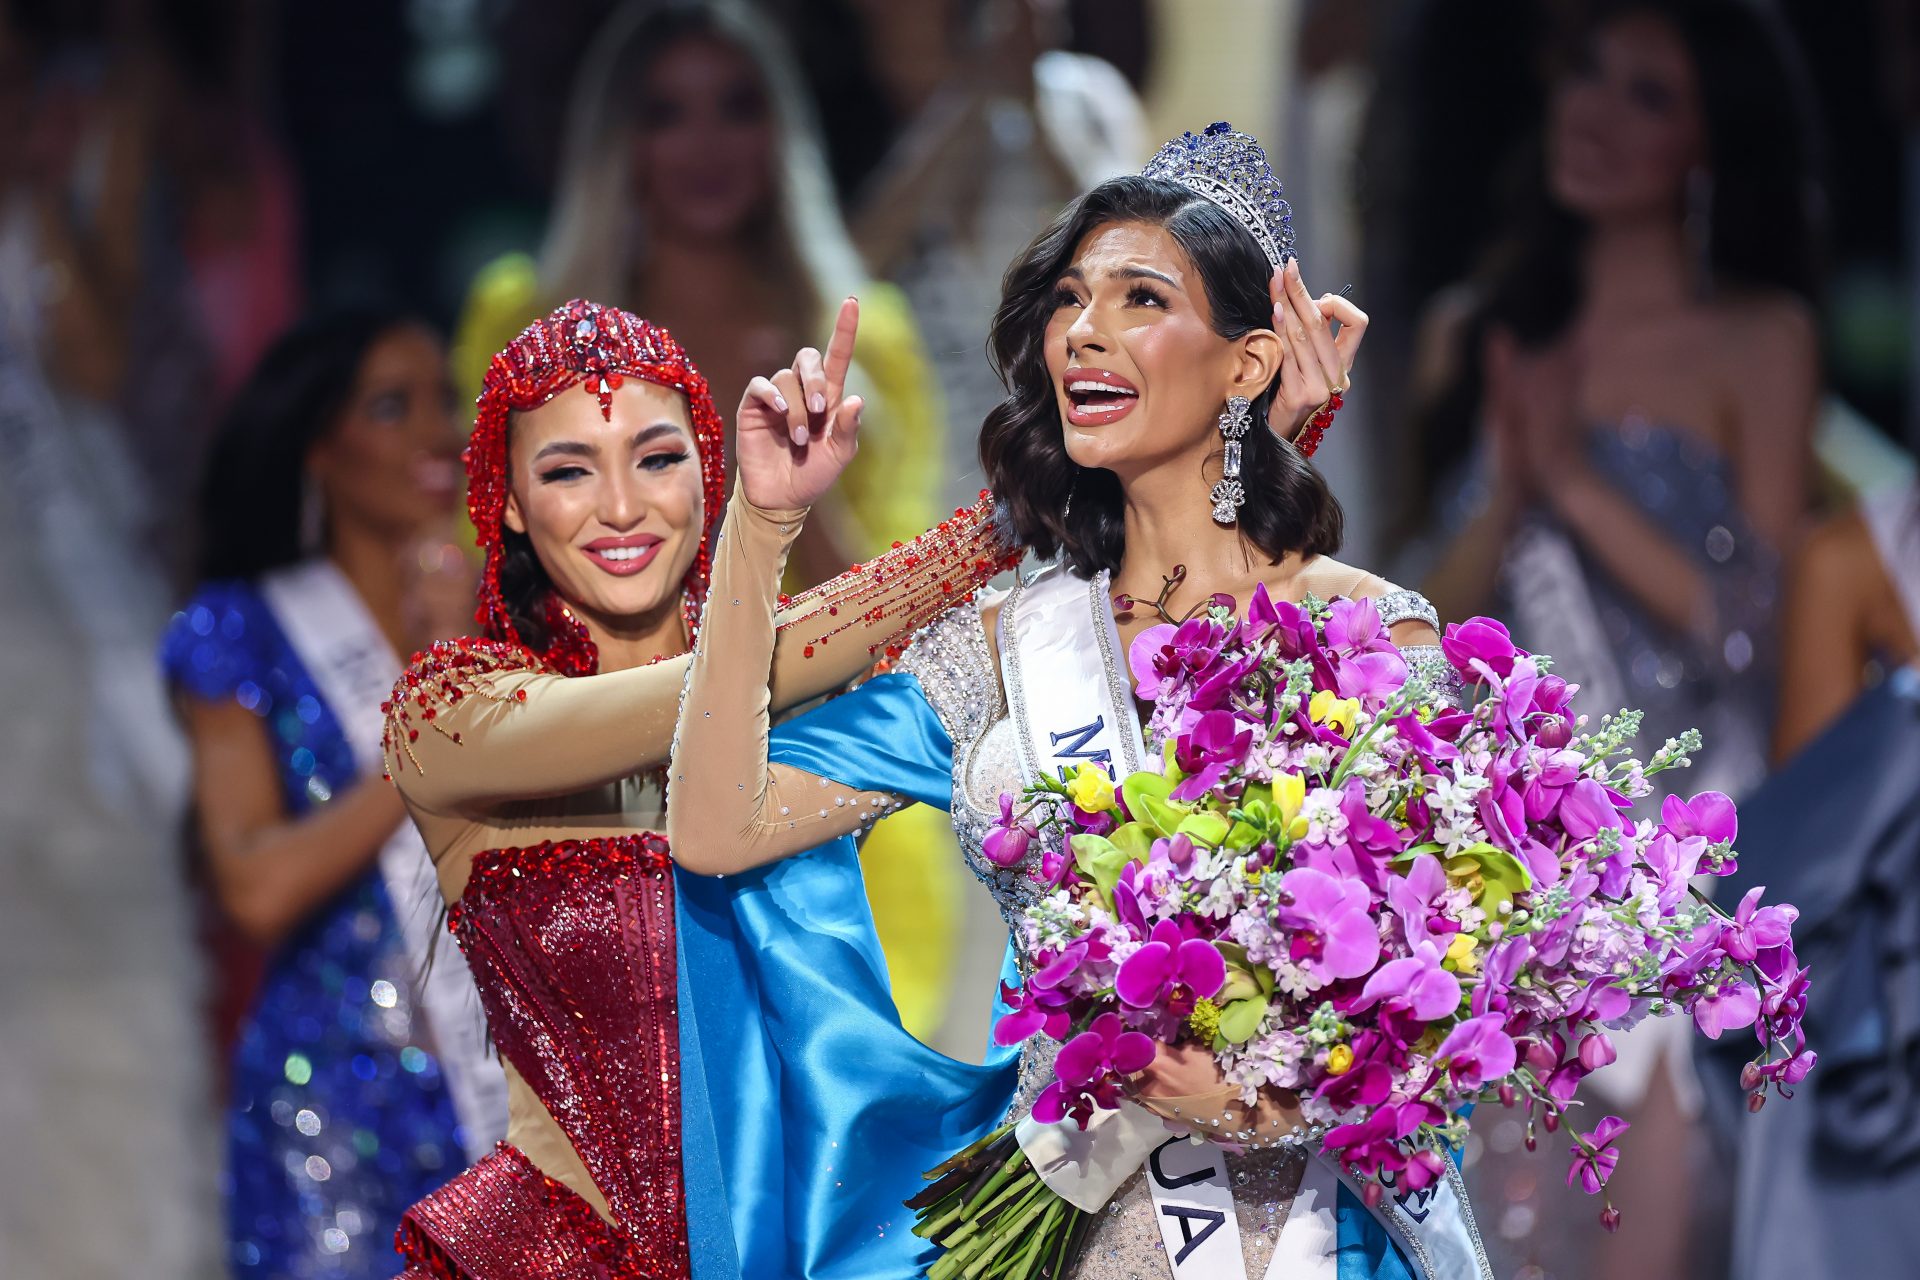 Bankruptcy for owner Miss Universe: Danger for the global pageant?